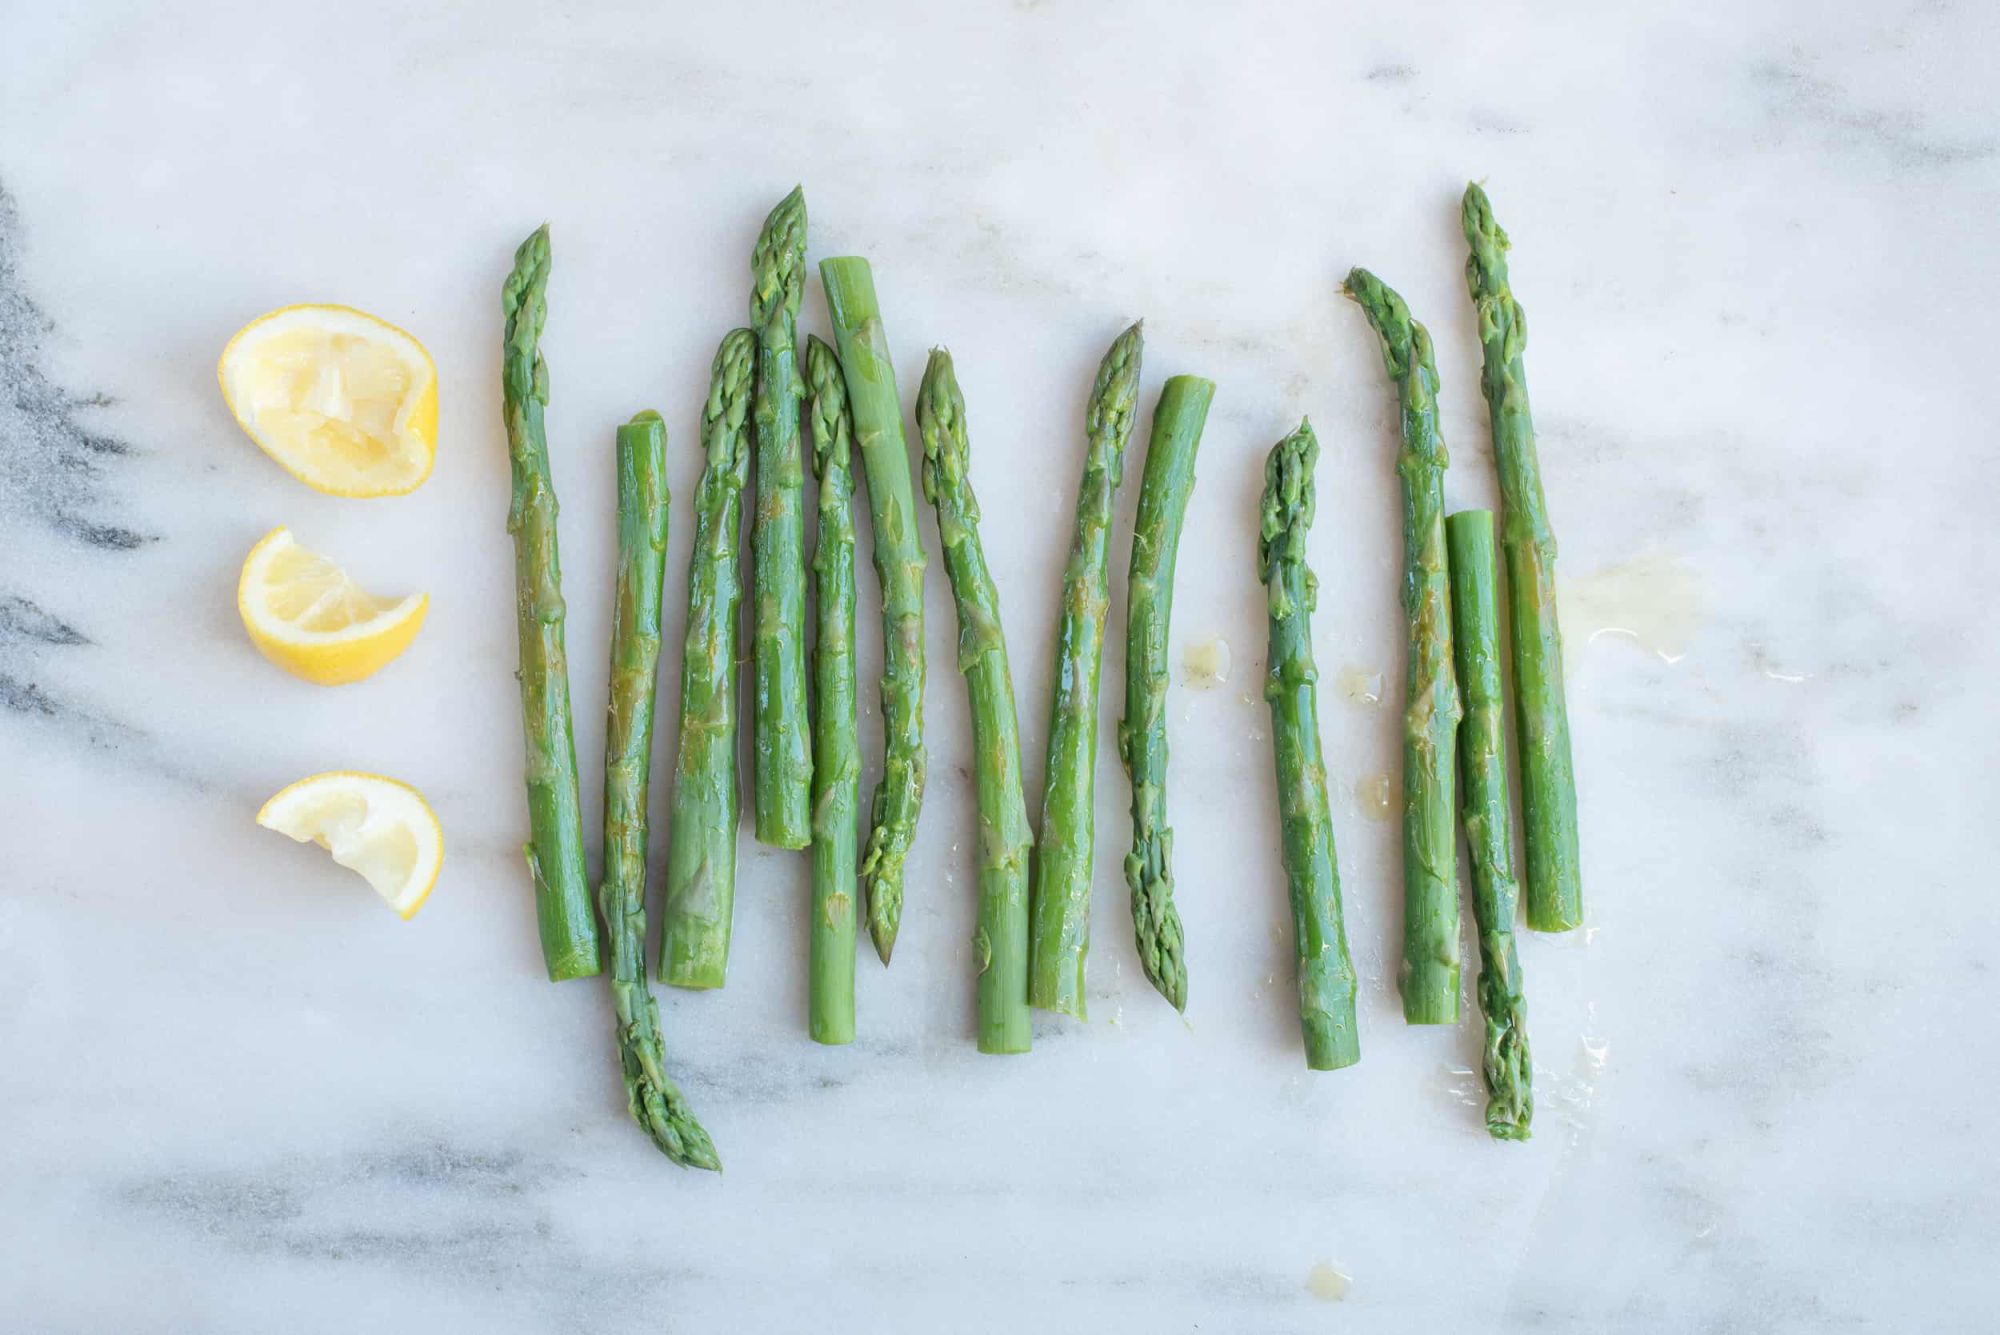 lemon wedges next to cooked whole asparagus spears on a white background